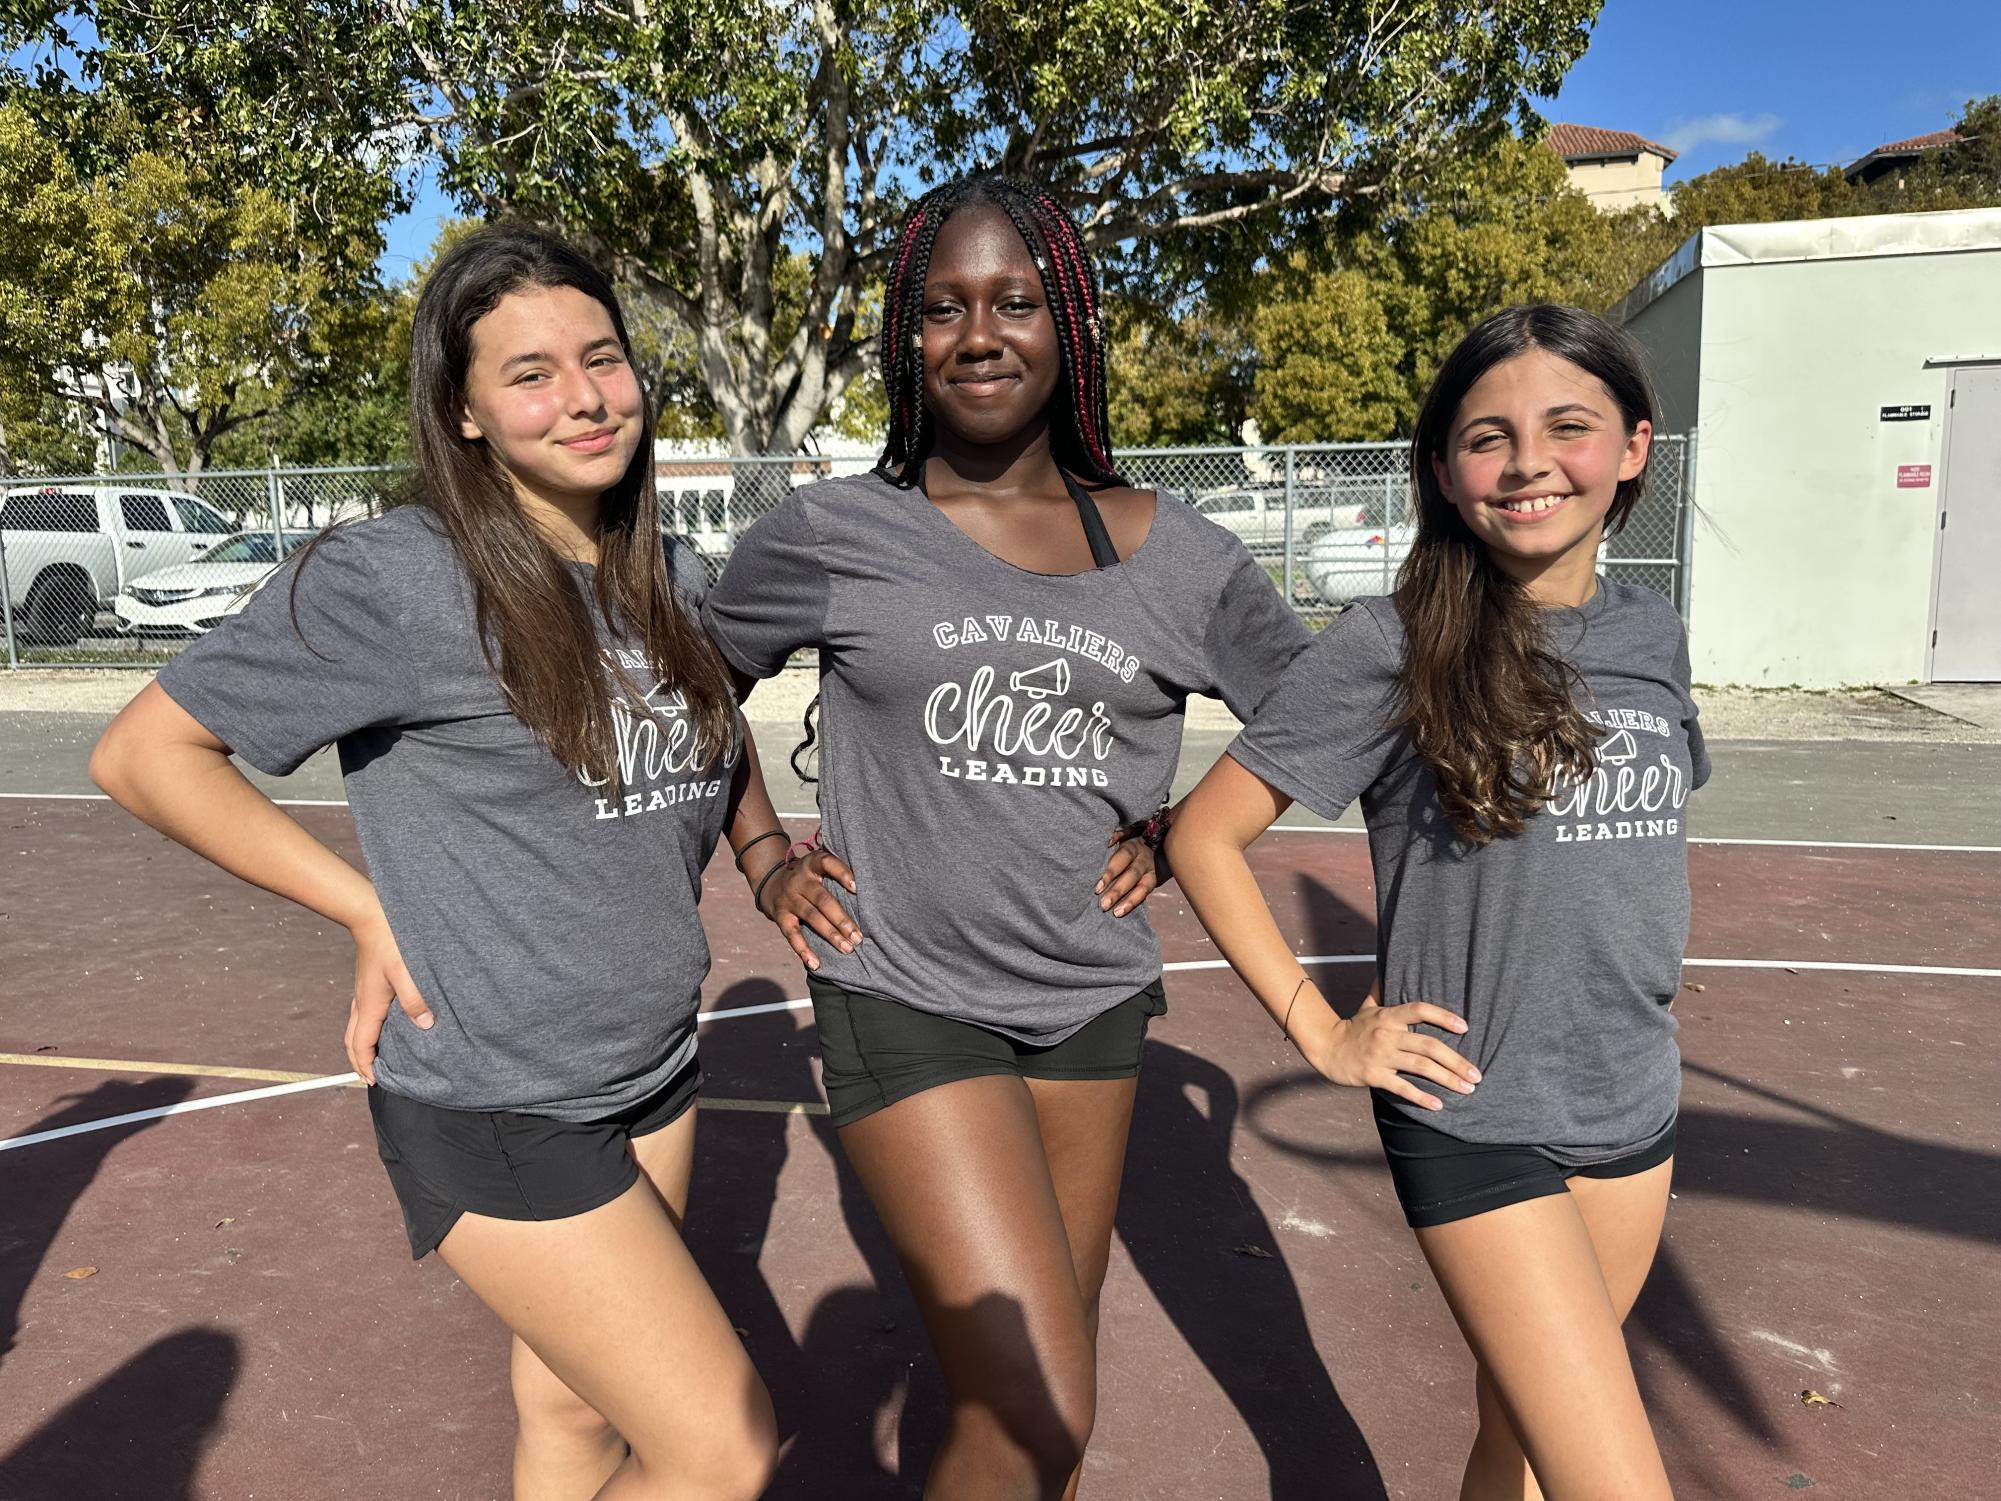 Future Spirit Officers sophomore Anistasia Sakuray, junior Klarel Dorelus and sophomore Suzana Moss attended the first cheer practice of the season on March 11.